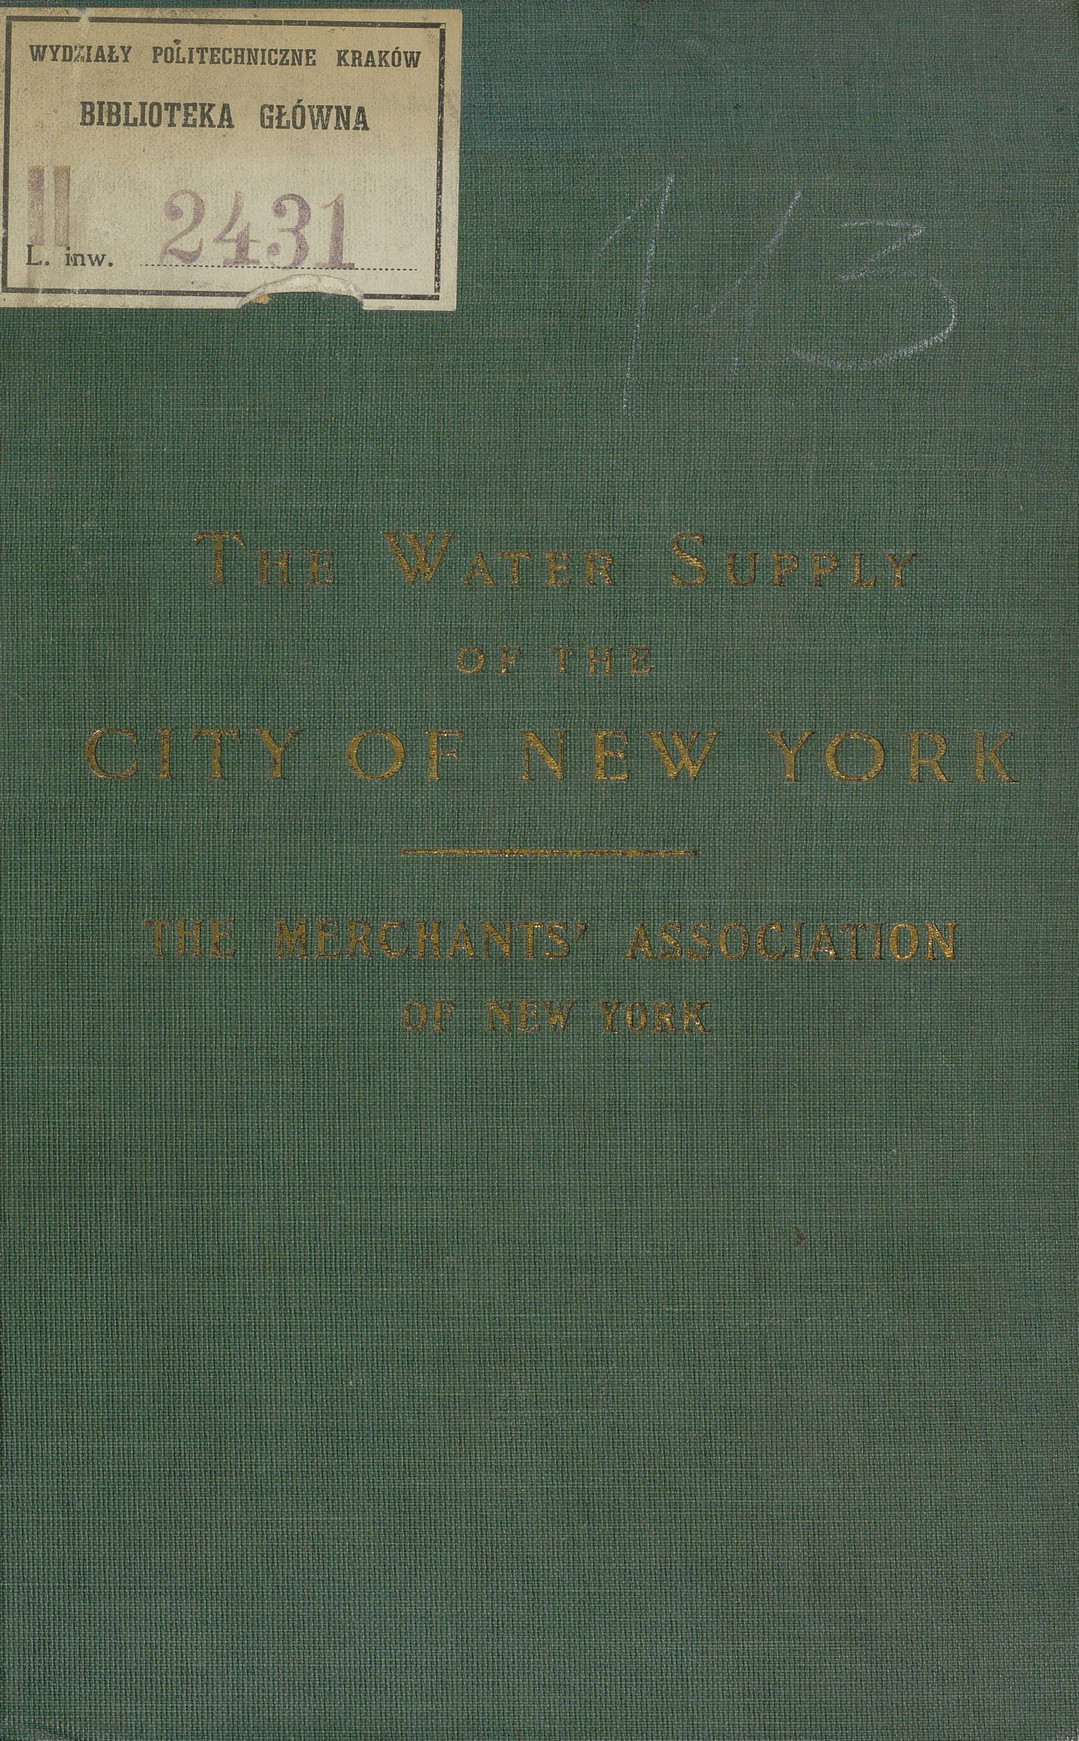 An inquiry into the conditions relating to the water-supply of the City of New York